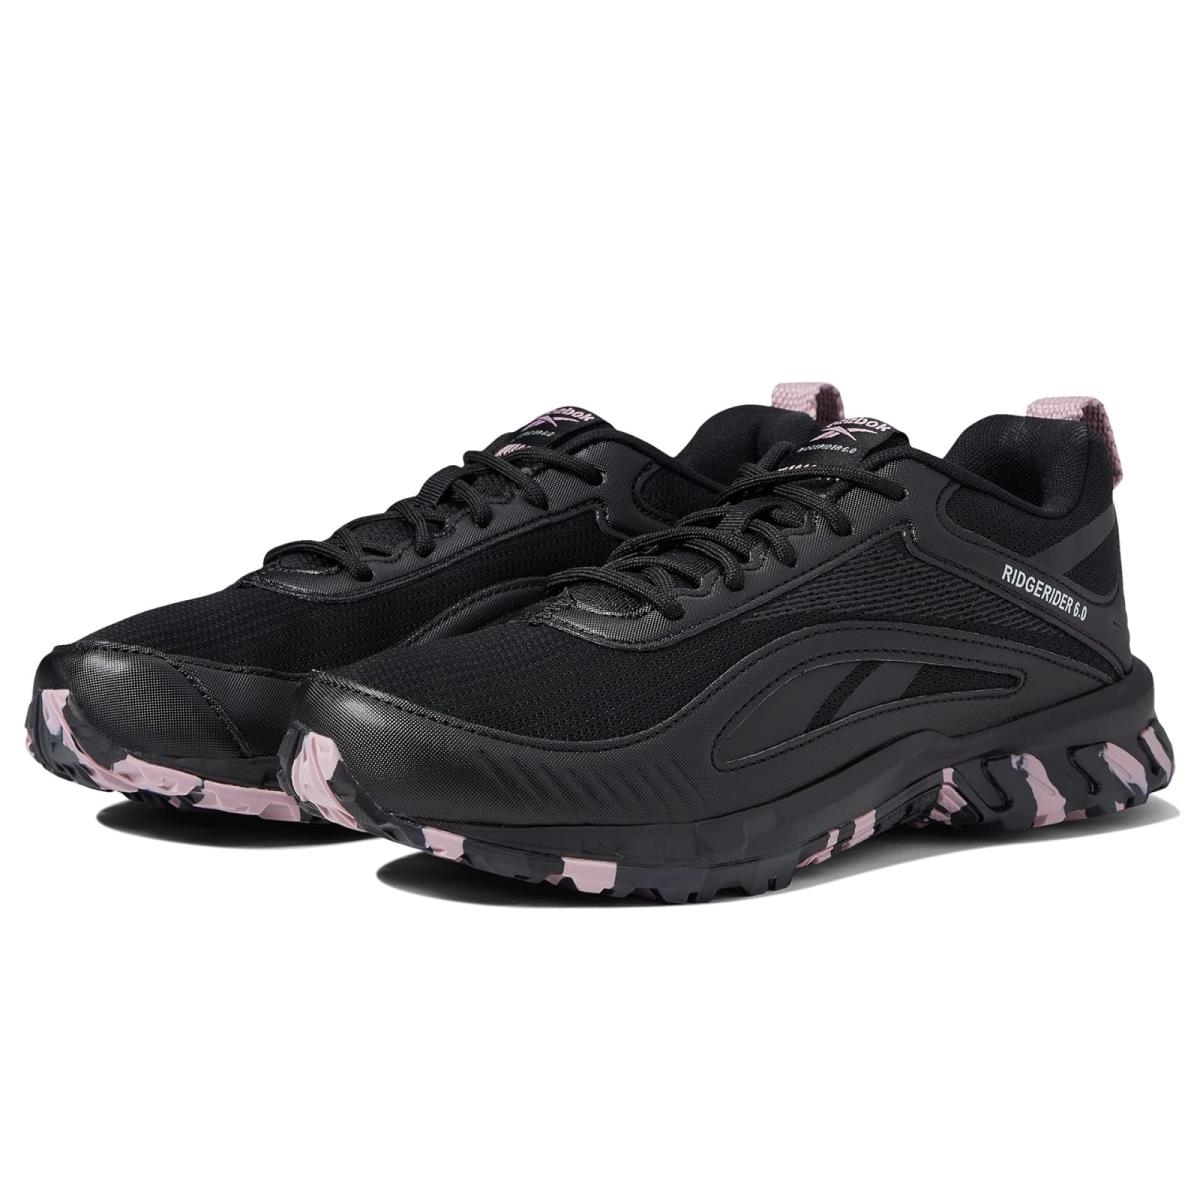 Woman`s Sneakers Athletic Shoes Reebok Ridgerider 6.0 Black/Pure Grey/Infused Lilac